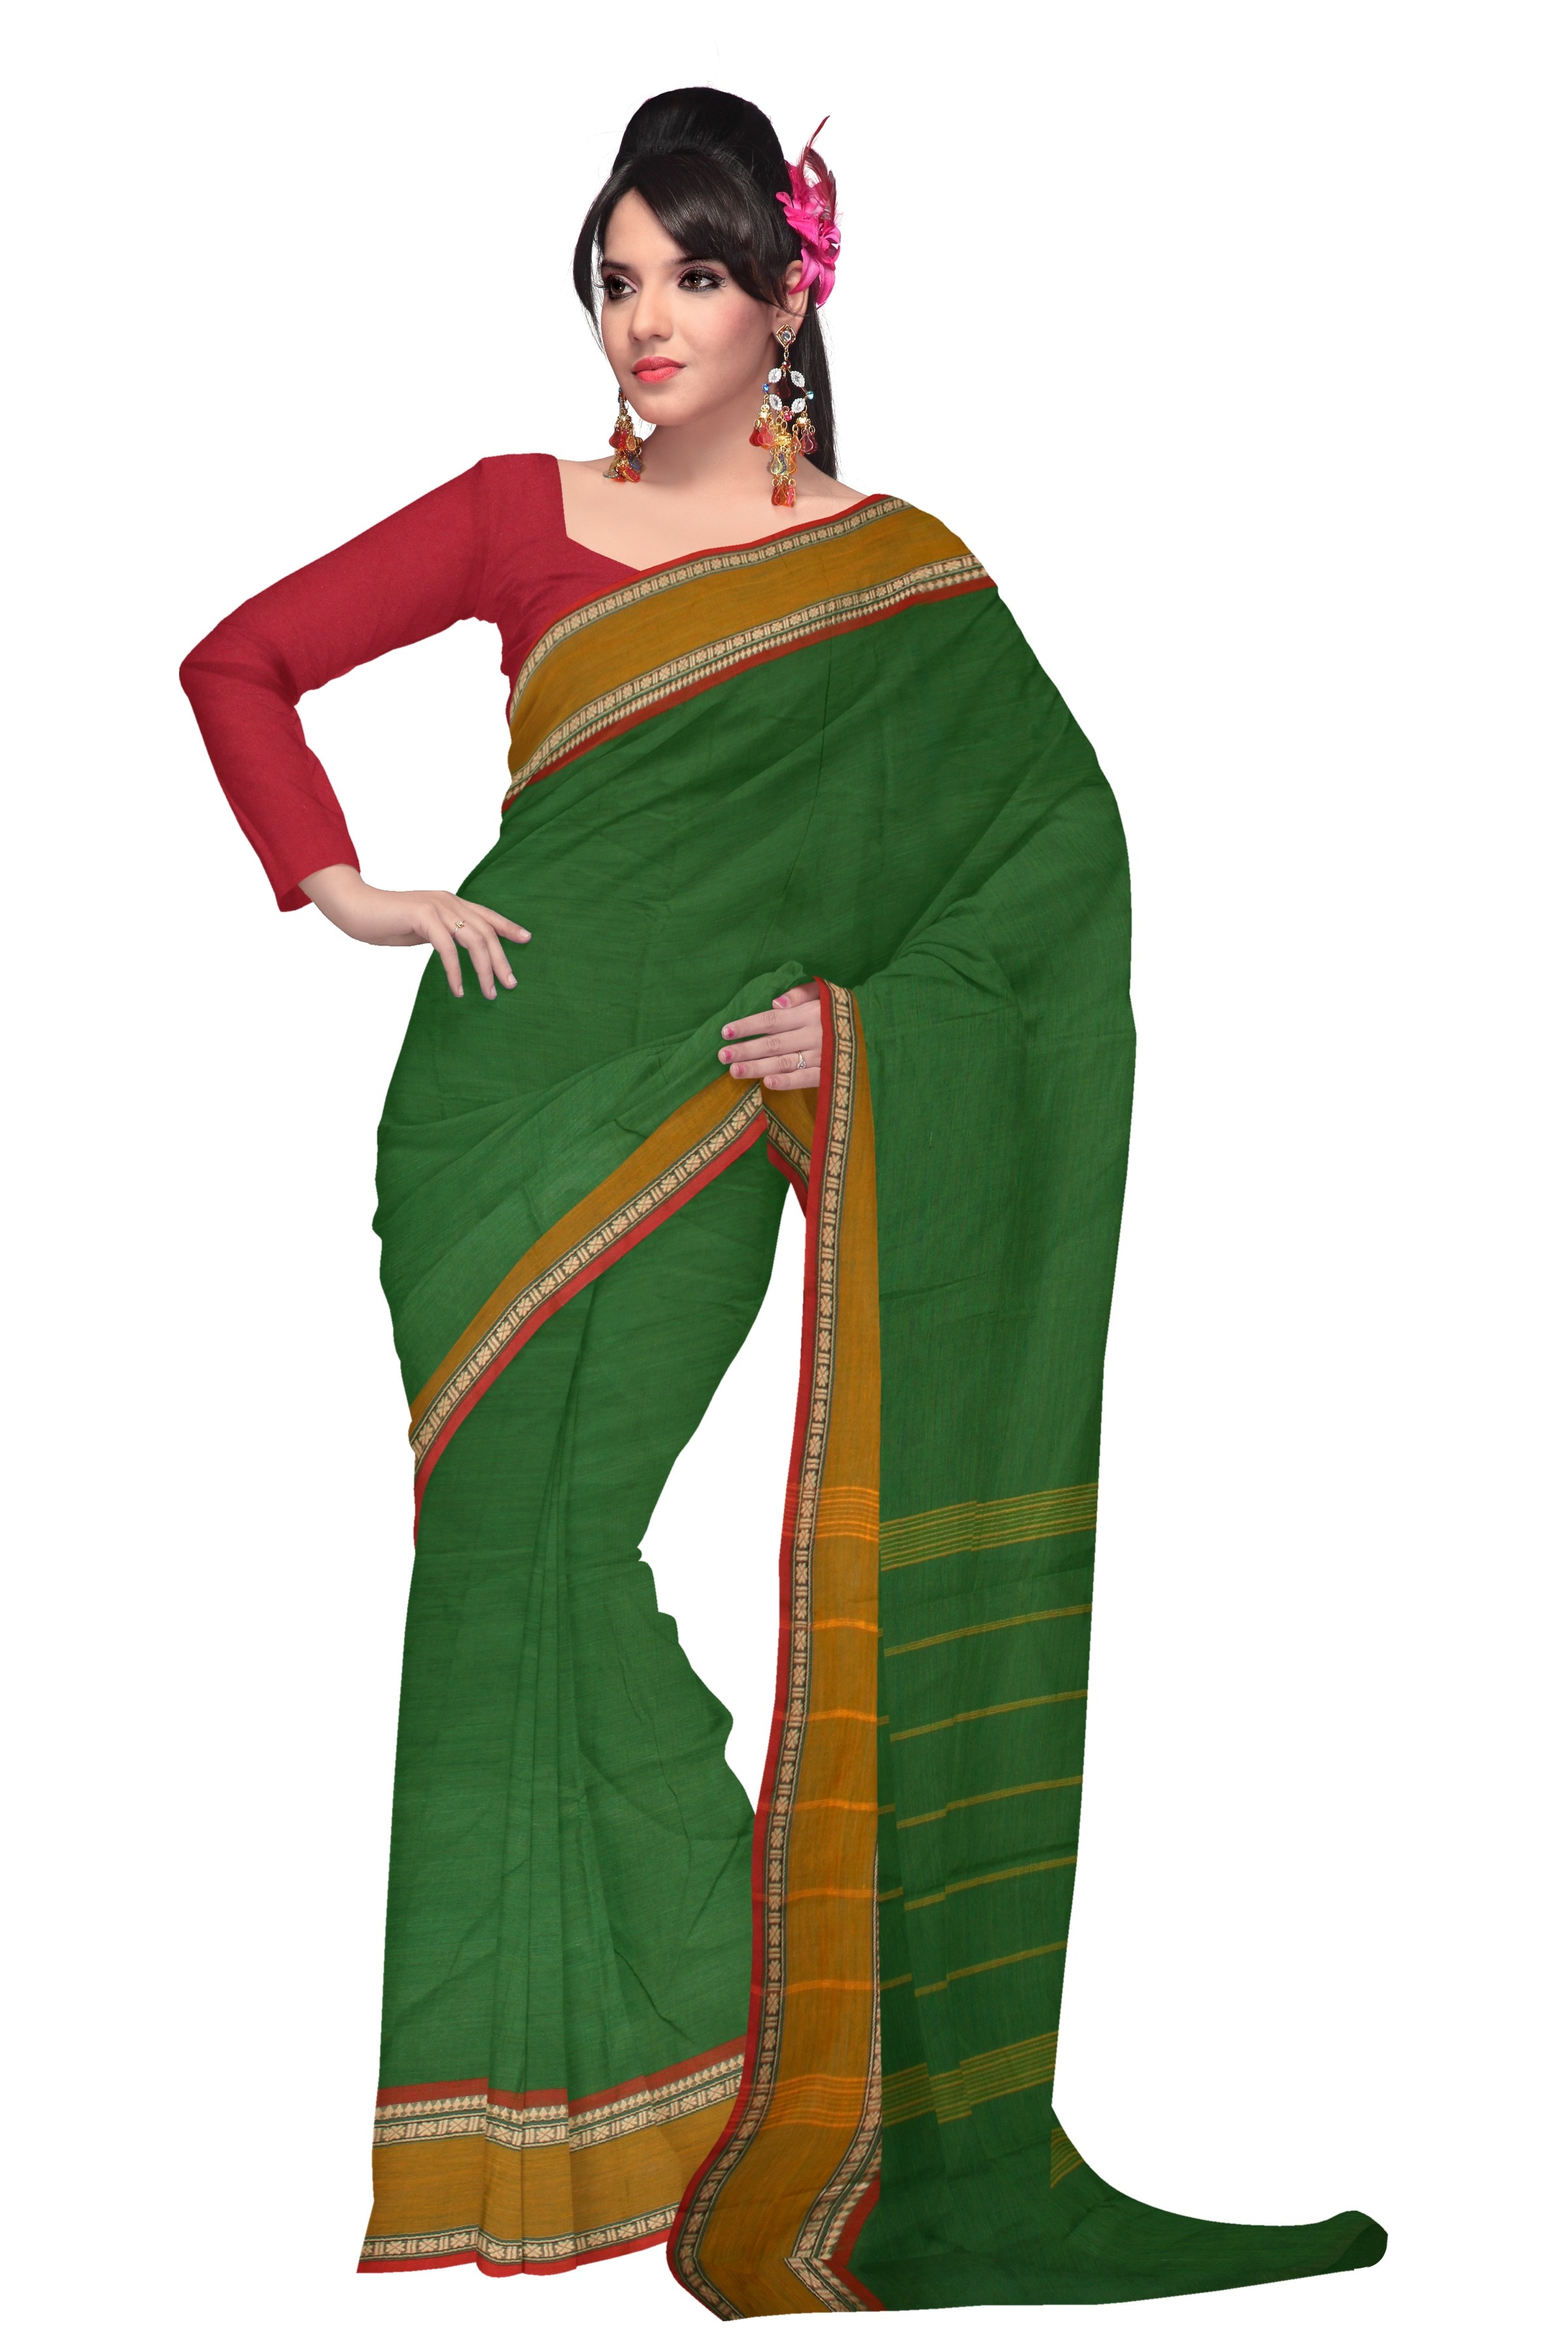 woman wearing green and red saree